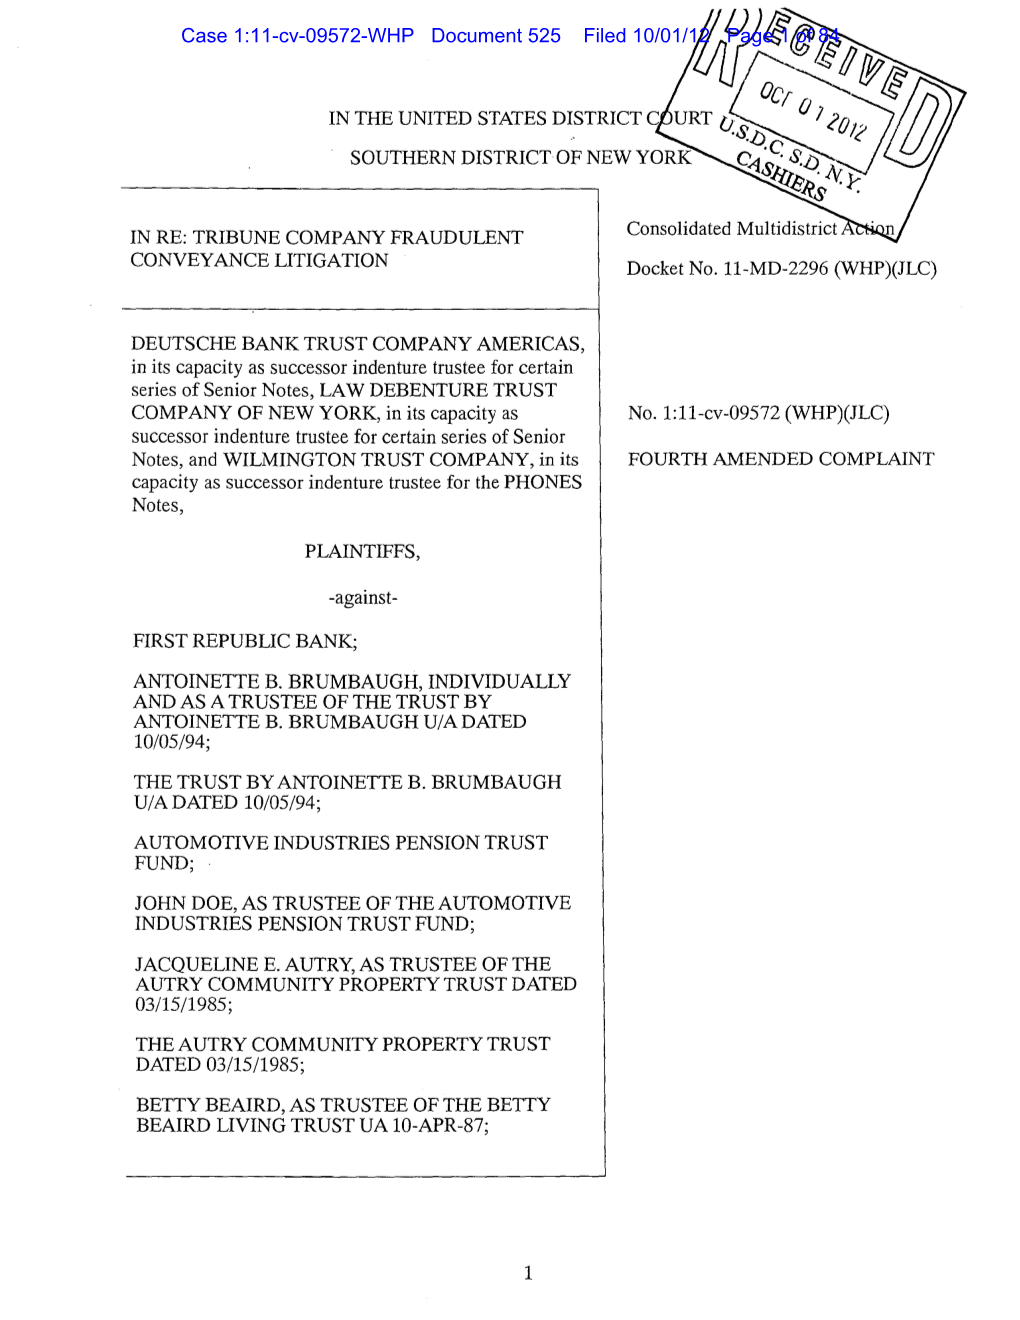 Case 1:11-Cv-09572-WHP Document 525 Filed 10/01/12 Page 1 of 84 1